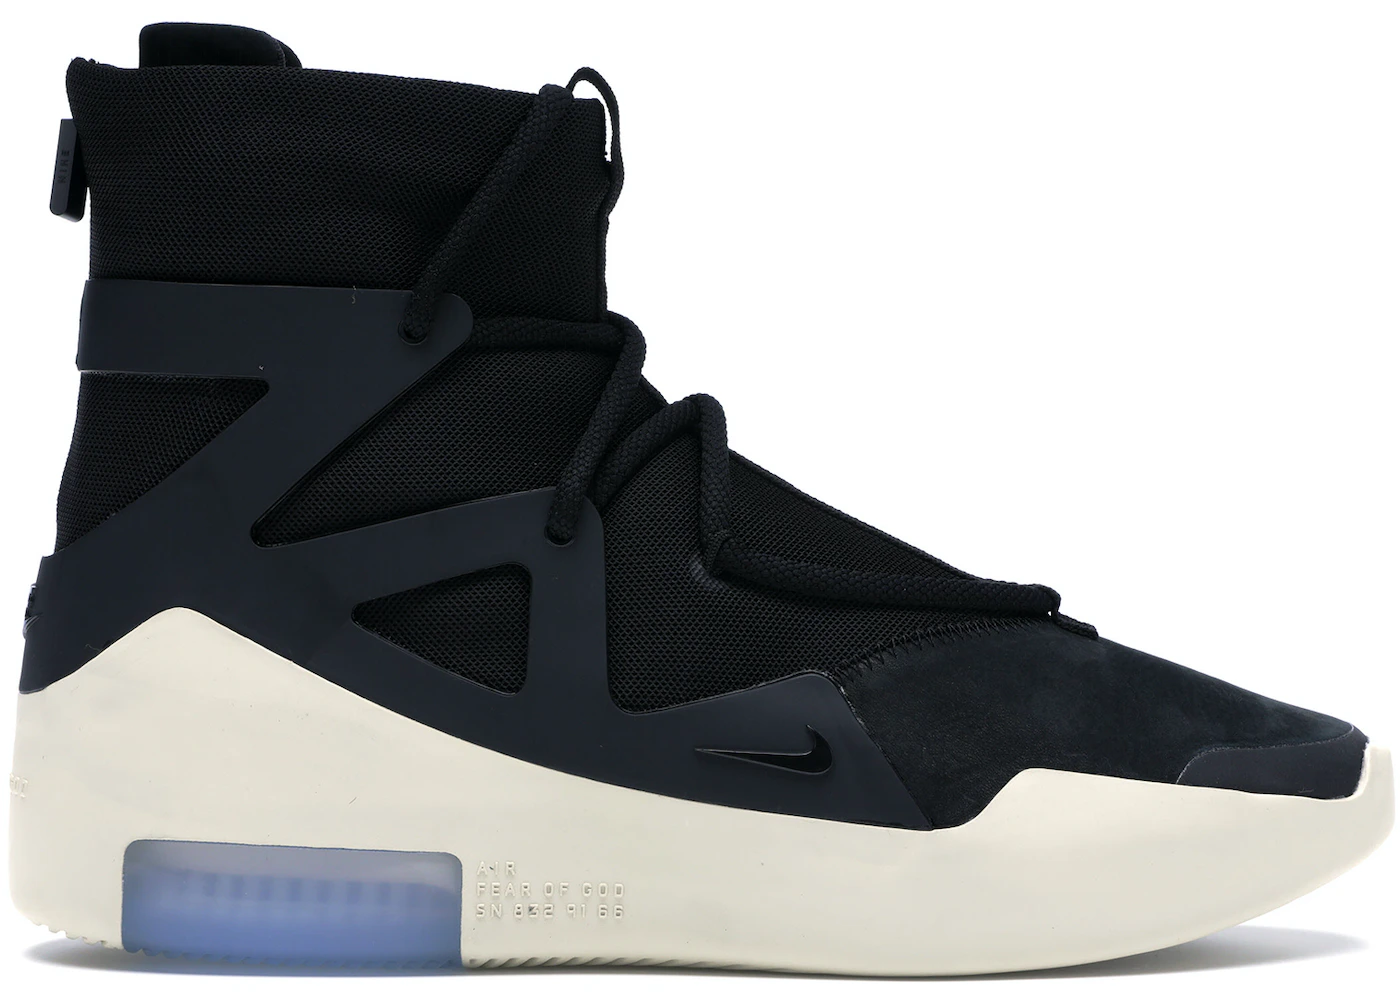 Search engine optimization Fitness Margaret Mitchell Nike Air Fear Of God 1 Black - AR4237-001 - US